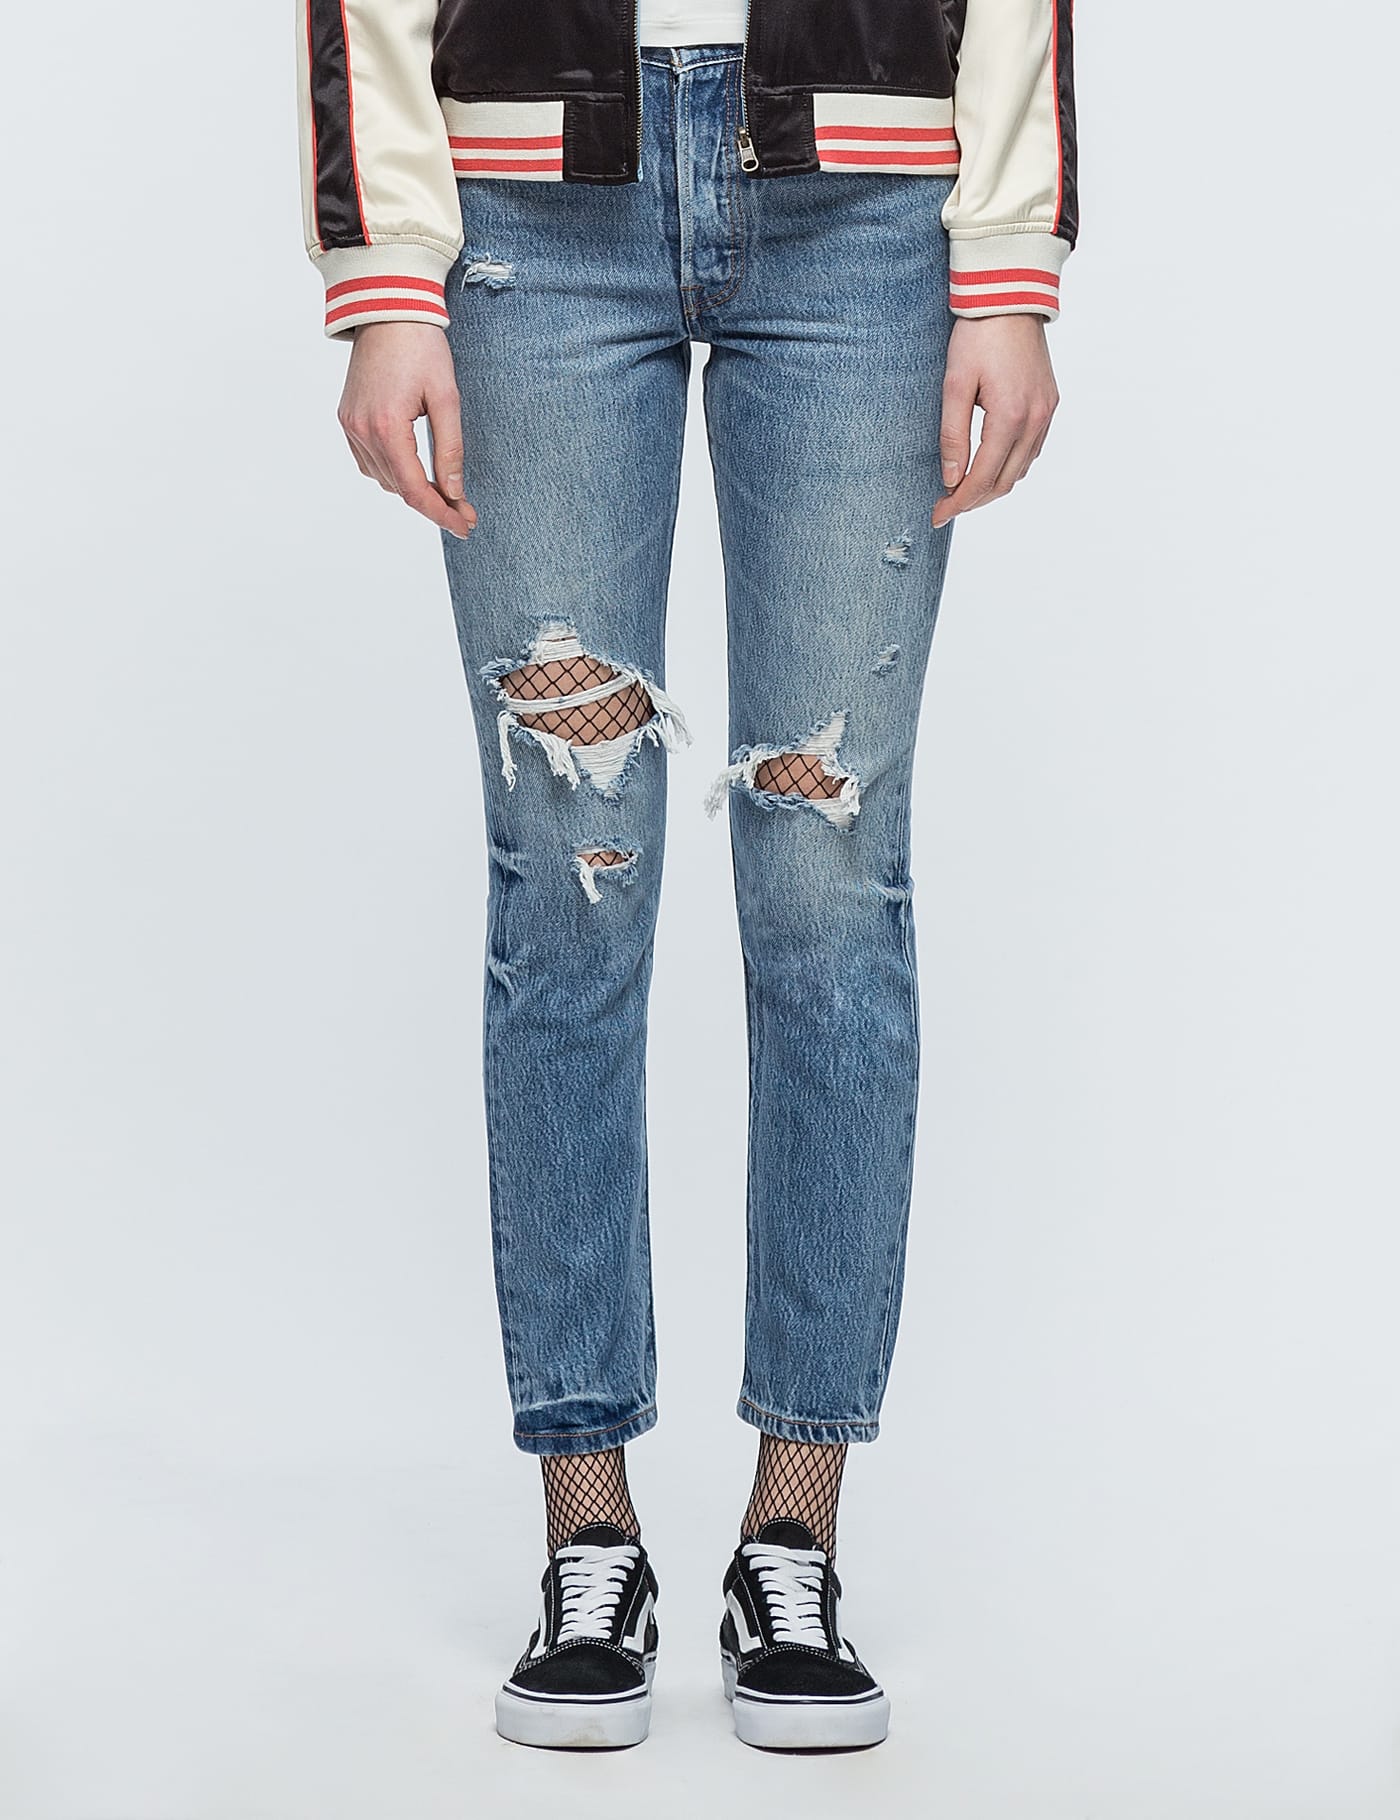 levi's 501 skinny in old hangouts